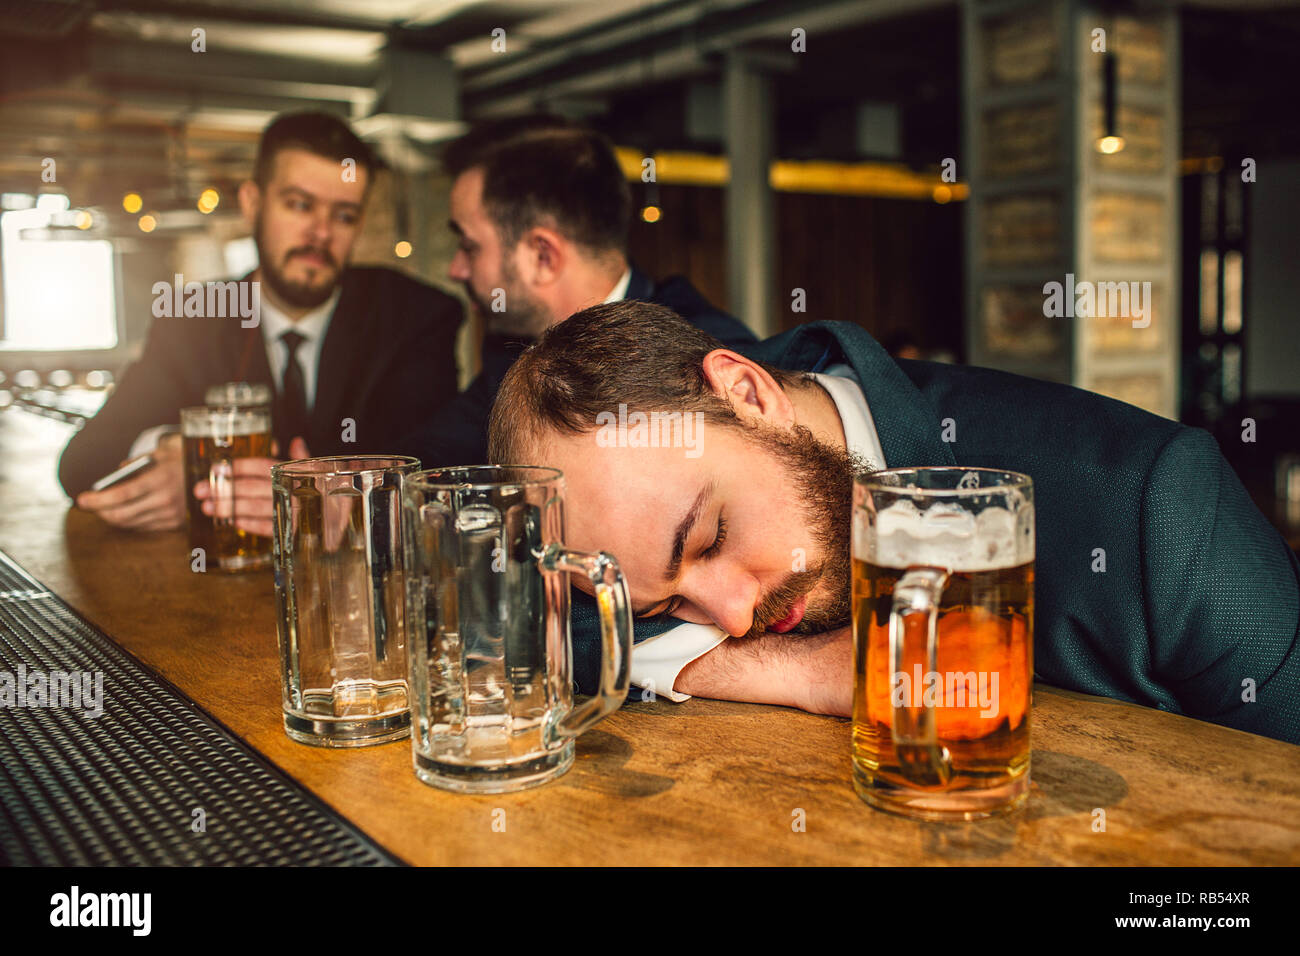 People Drinking Alcohol At Bar